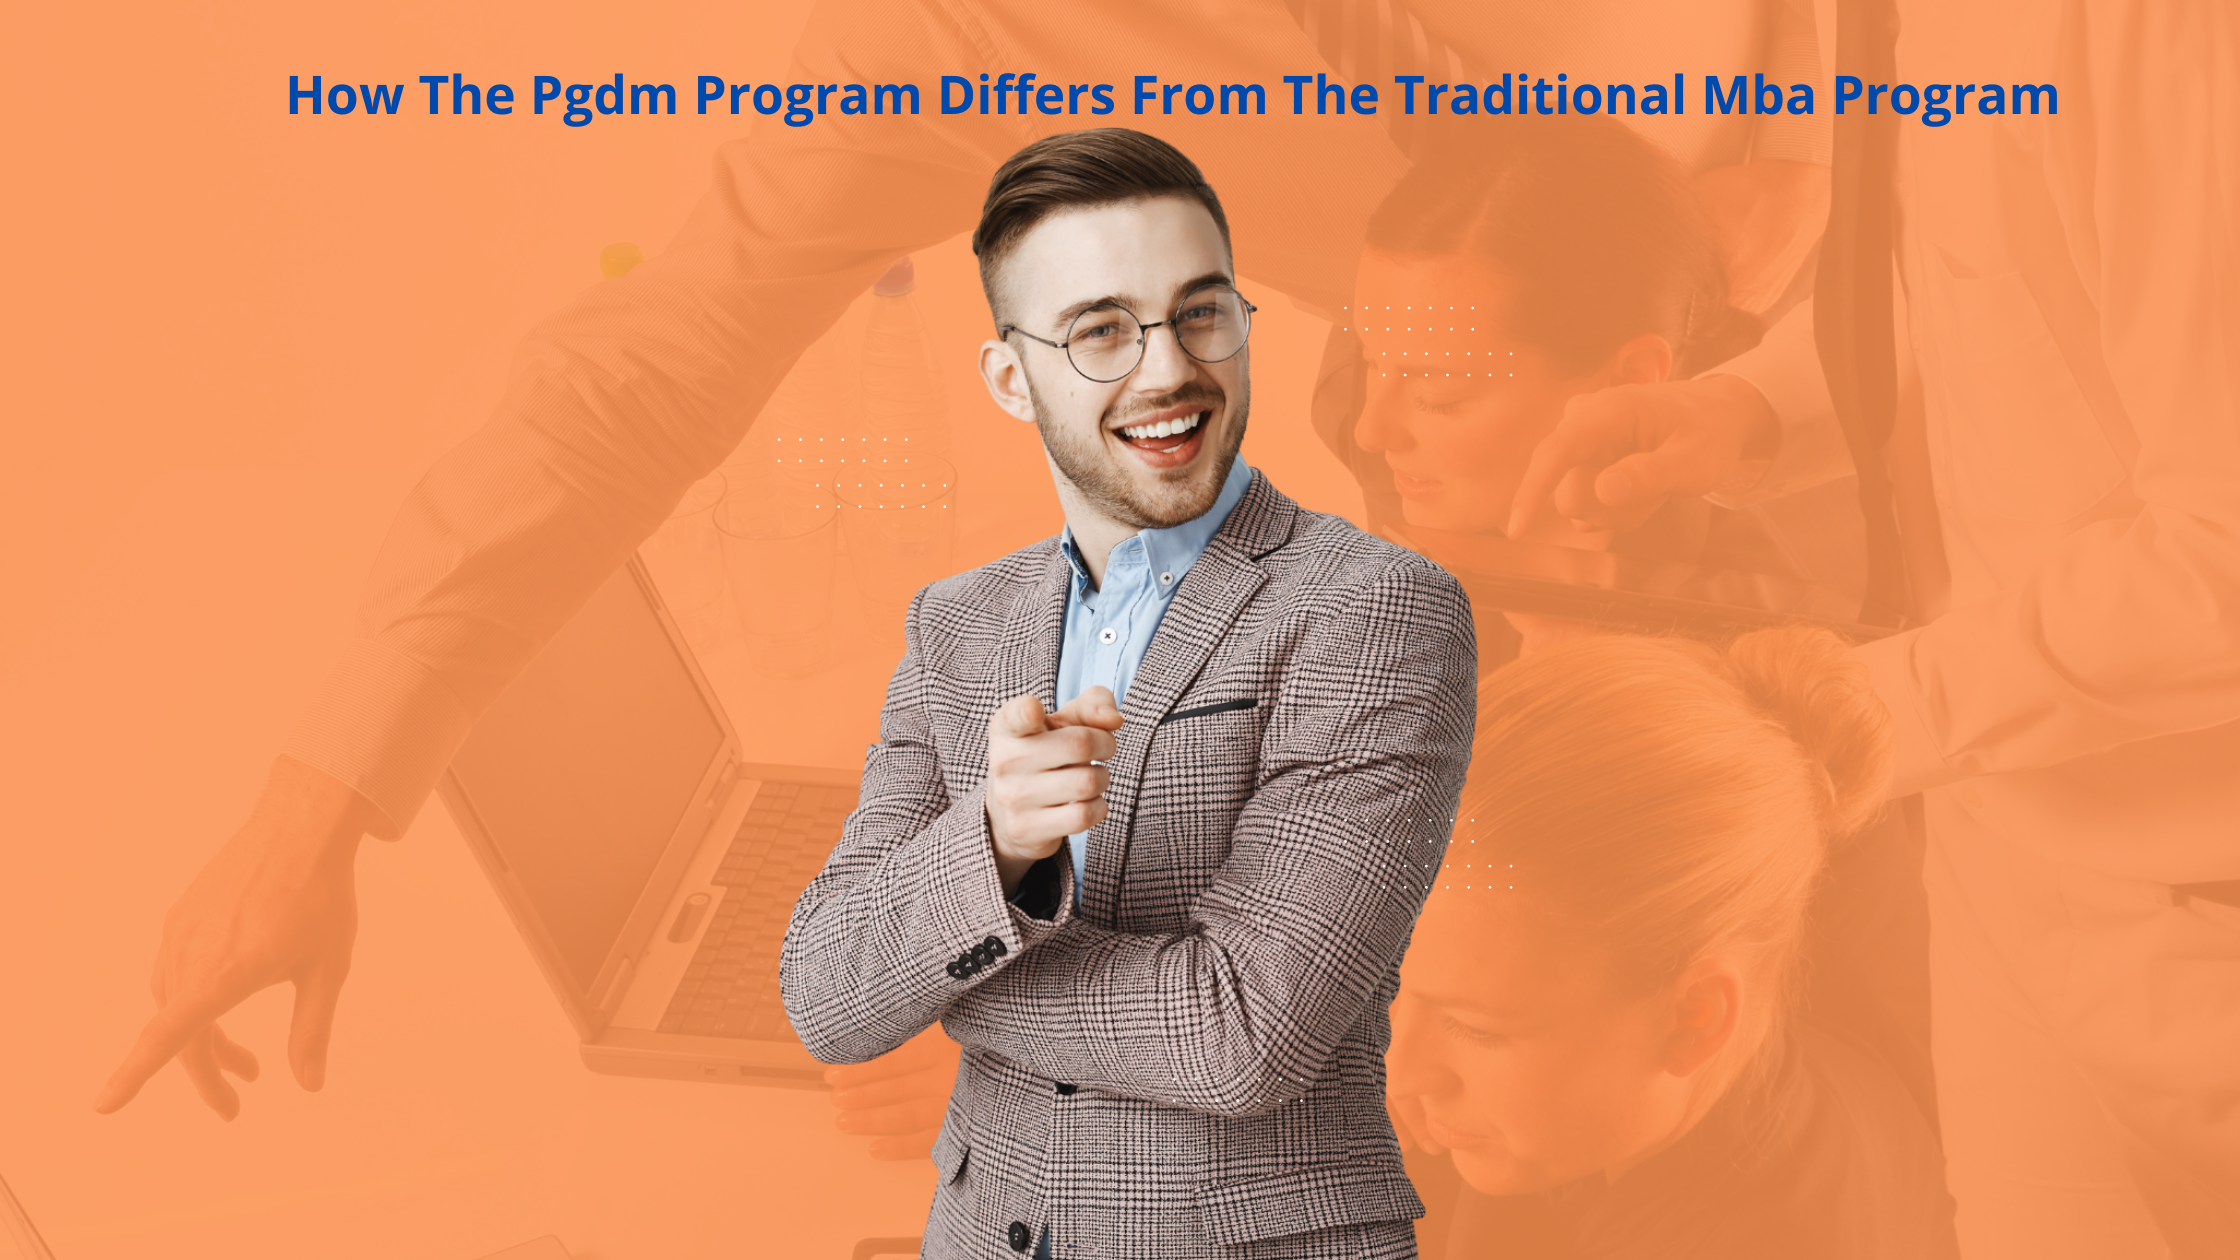 How The Pgdm Program Differs From The Traditional Mba Program